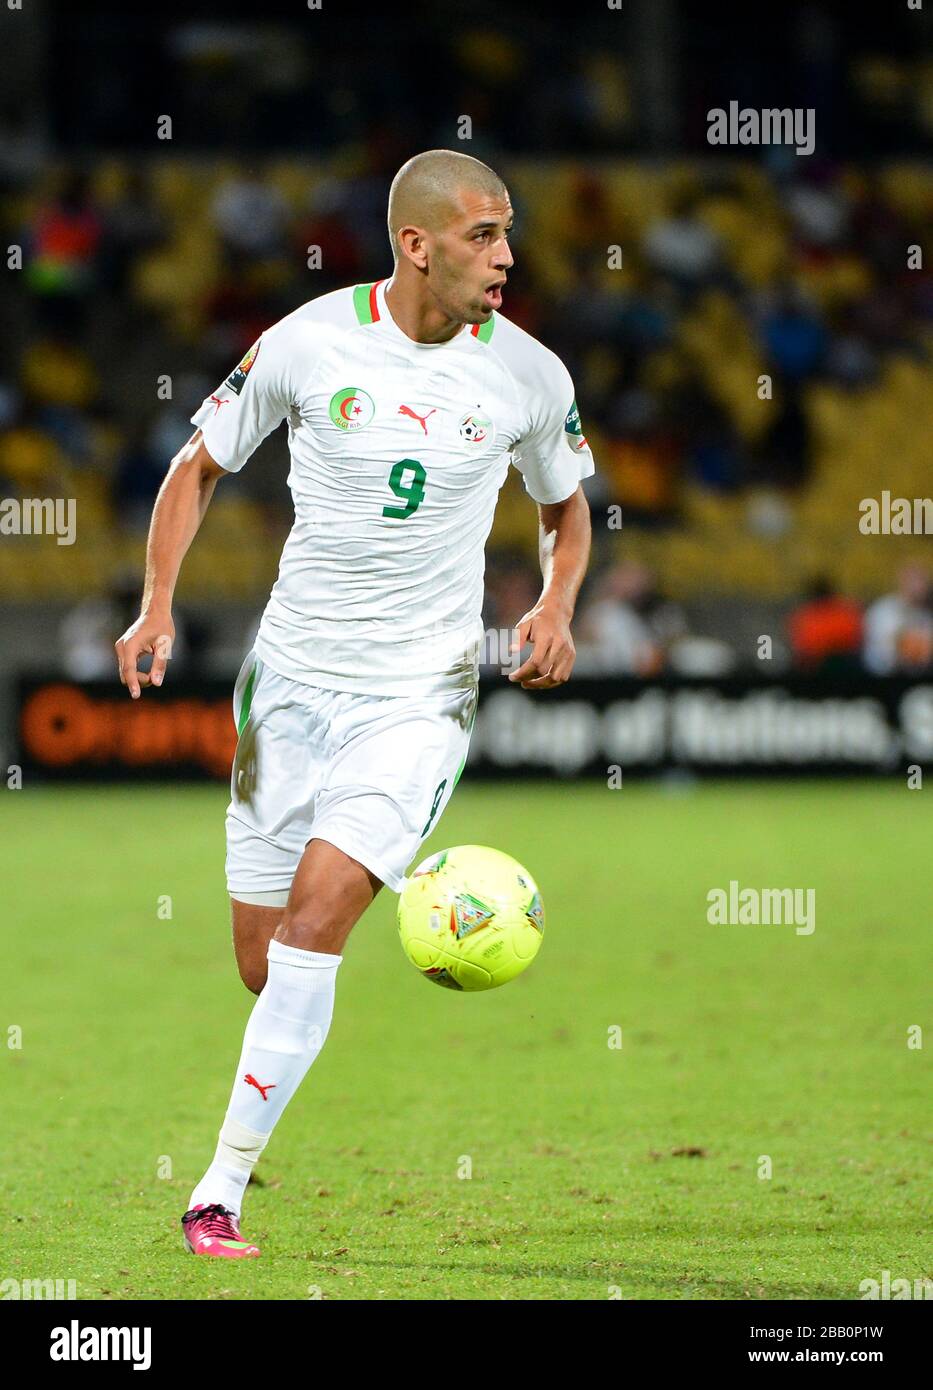 Anderlecht's Islam Slimani pictured during a soccer match between